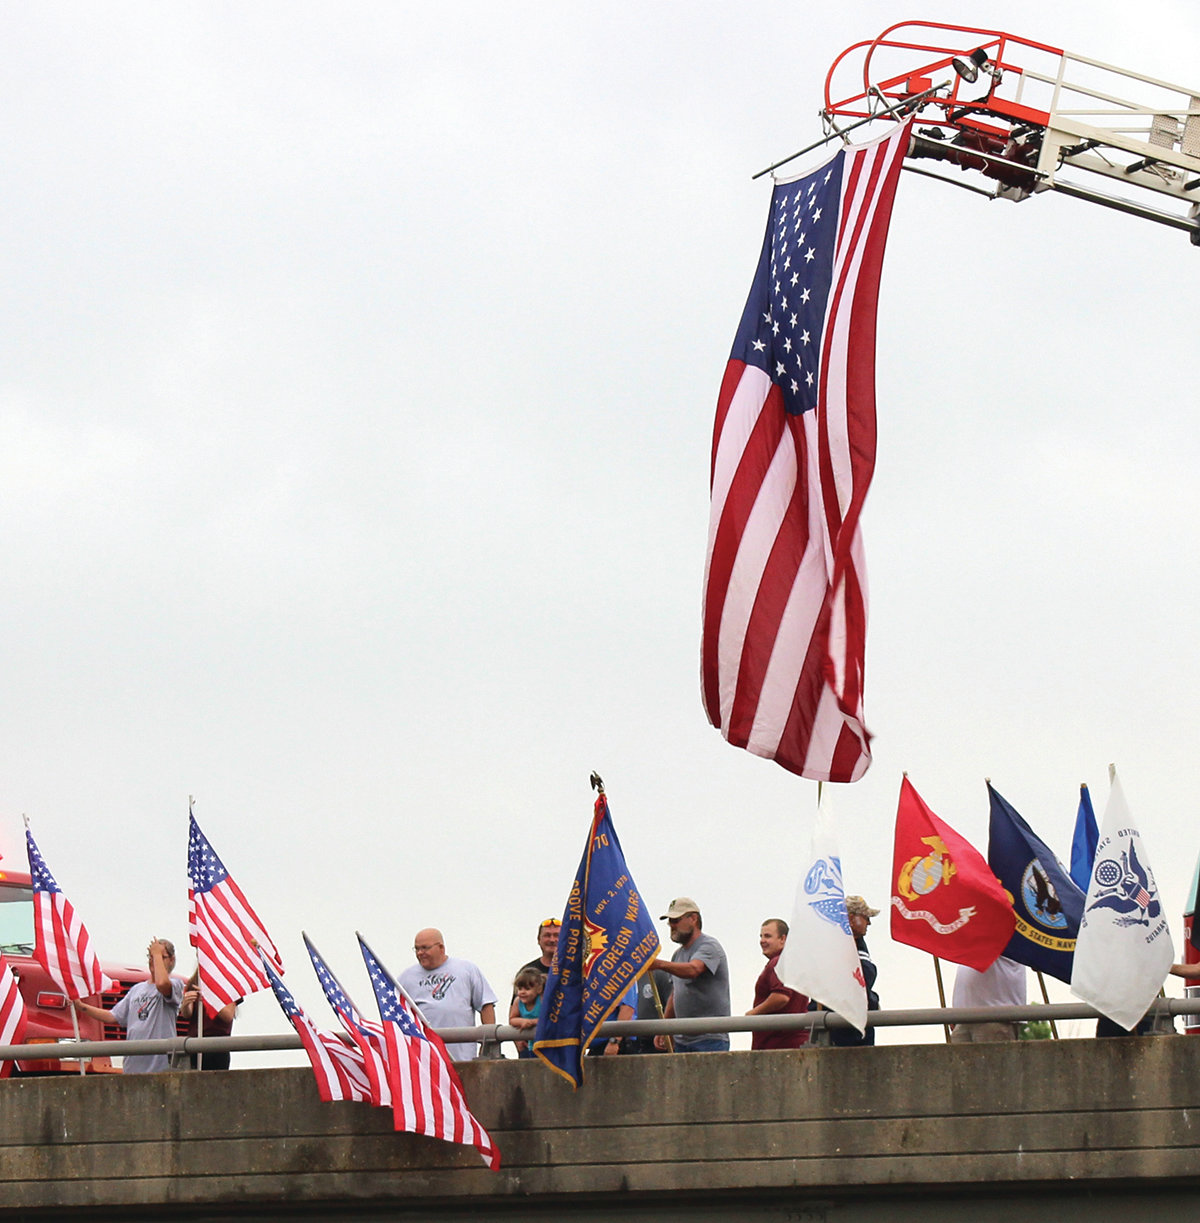 Members of both the American Legion Post No. 30 and VFW Post No. 3770 hold flags in support of the country and military on a Mountain Grove overpass as the Vietnam War Traveling Memorial Wall goes by the exit.